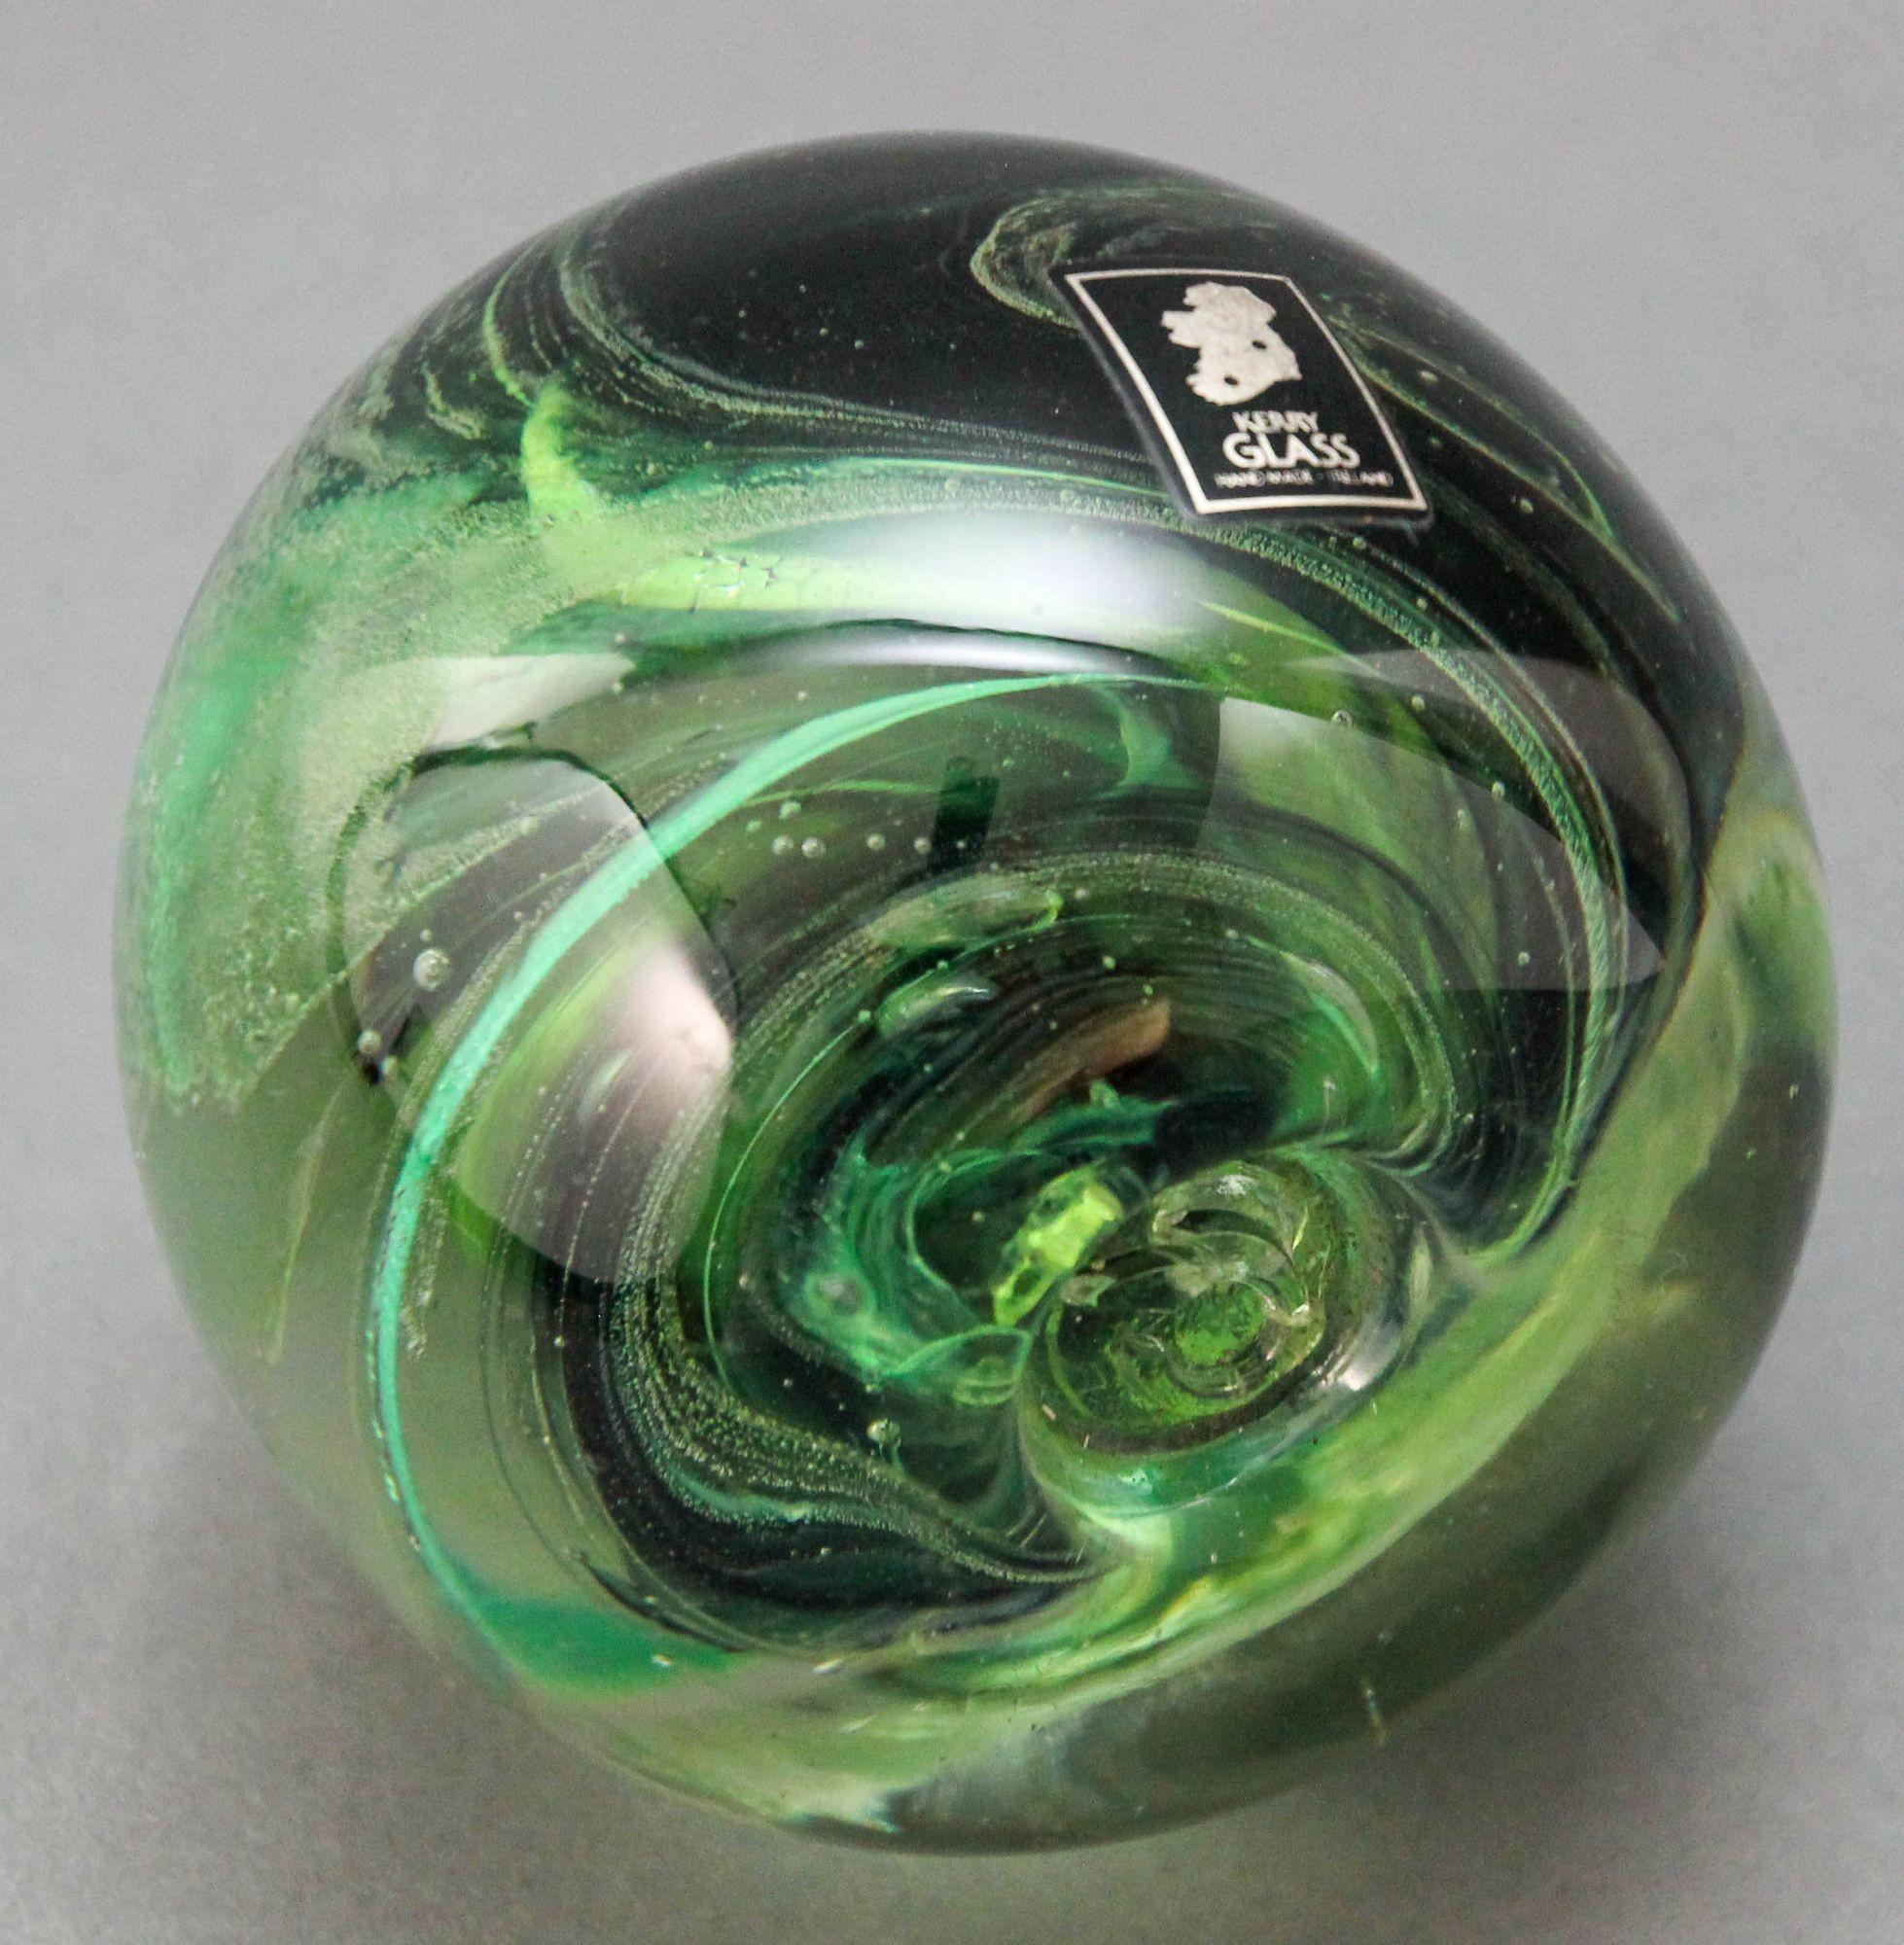 KERRY Irish Art Glass Paperweight Hand Blown in a Jade to Emerald Green 1980s For Sale 2